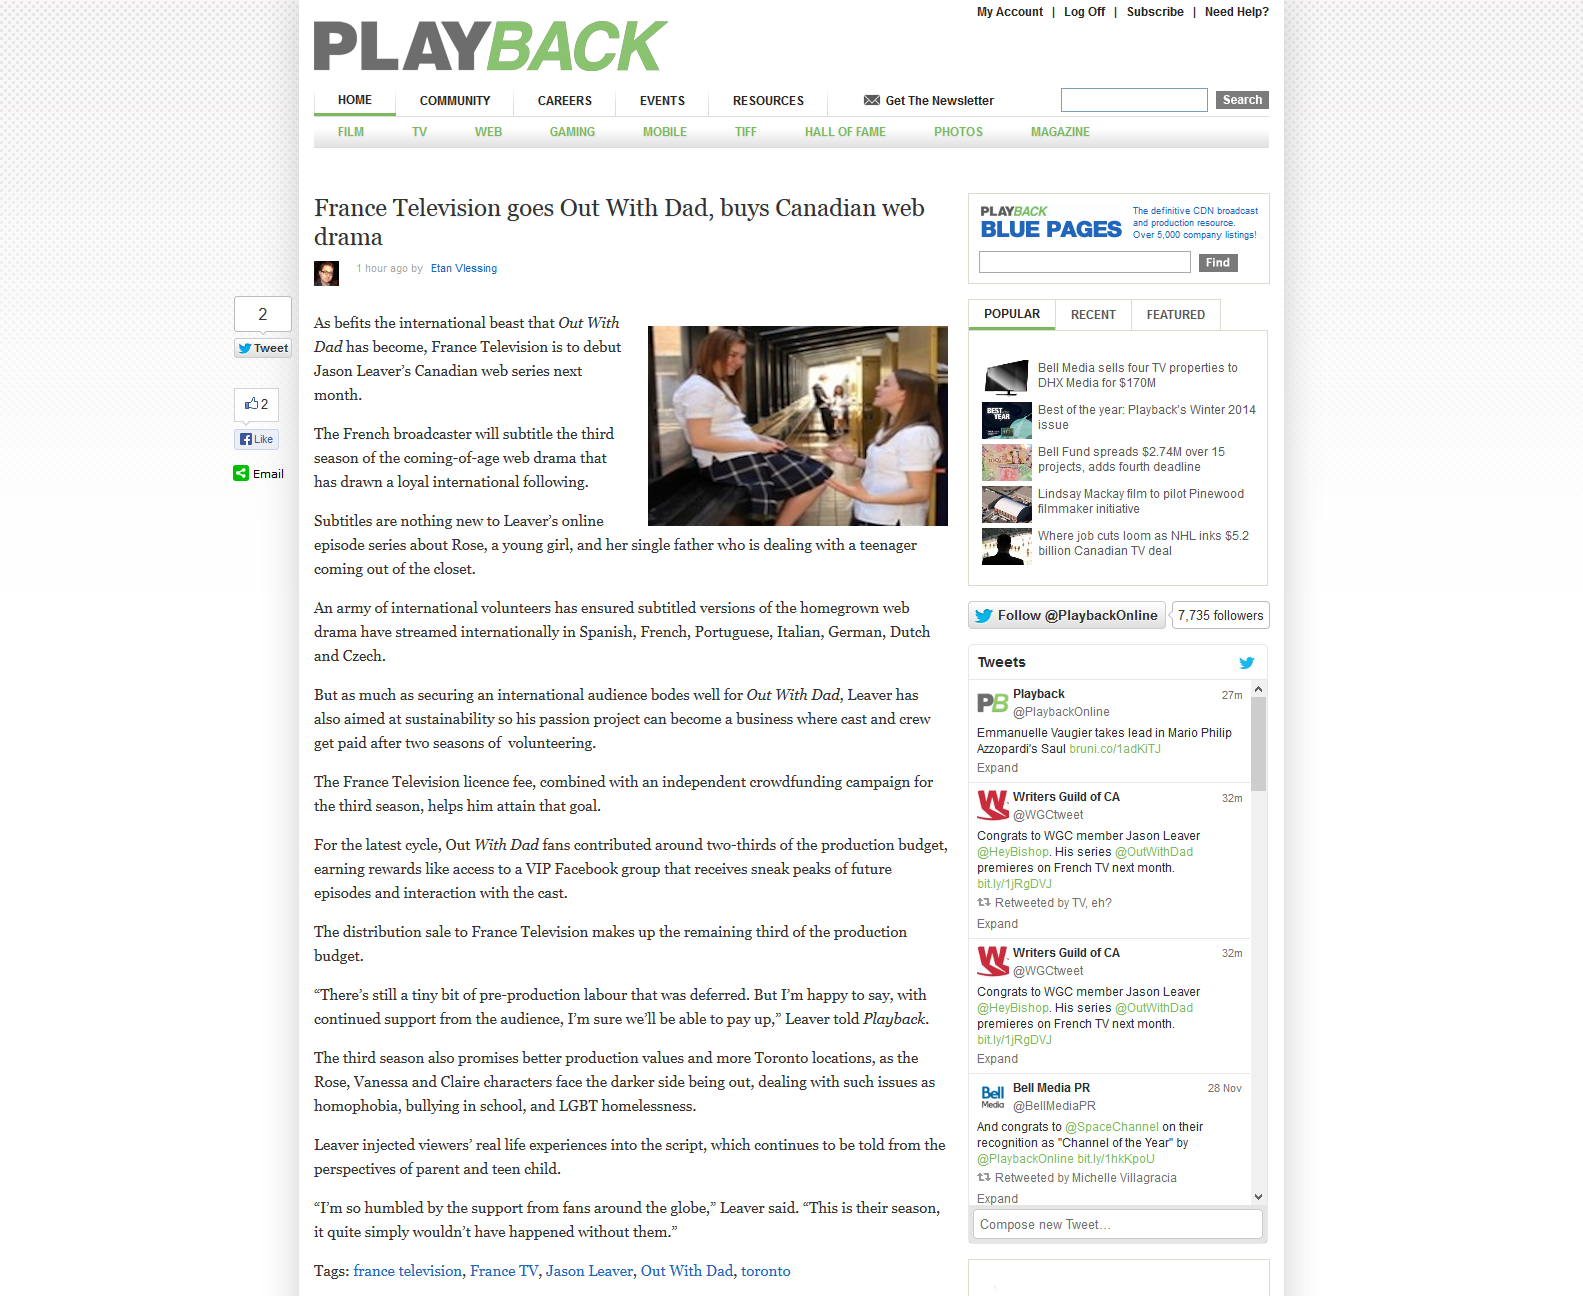 Getting some press with Playback Online